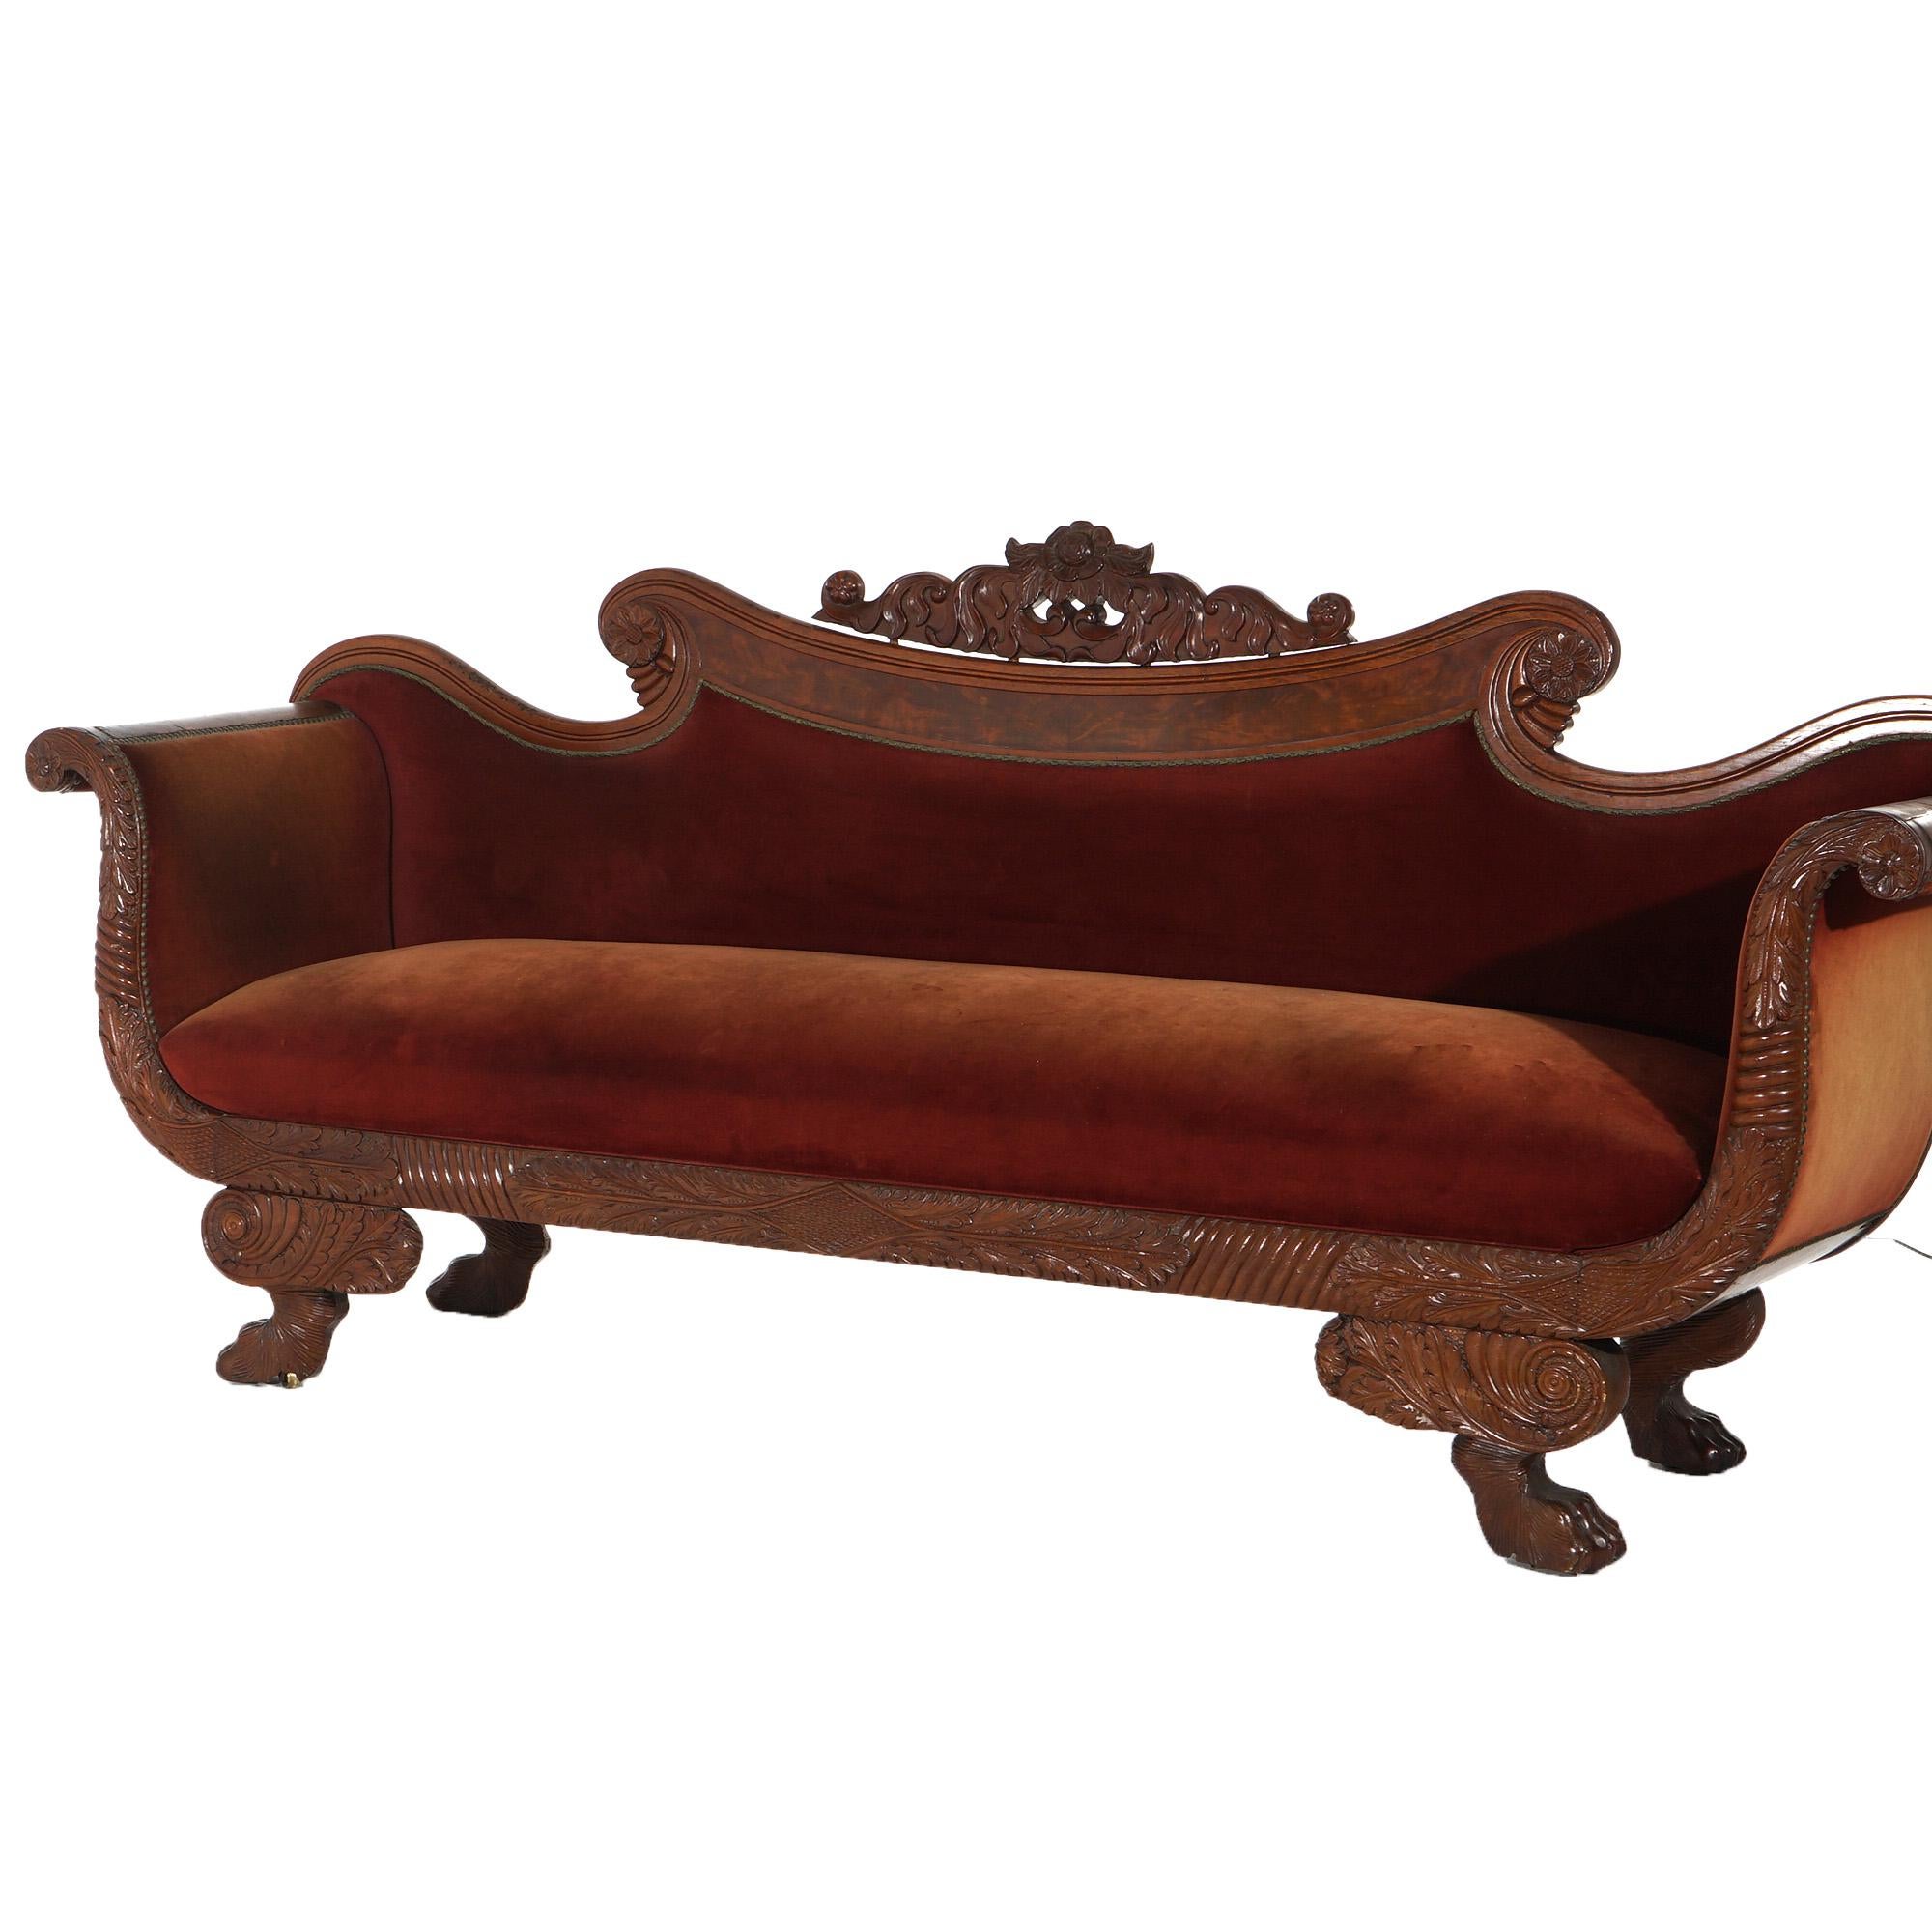 Upholstery Antique Neoclassical American Empire Carved Walnut And Burl Sofa C1840 For Sale